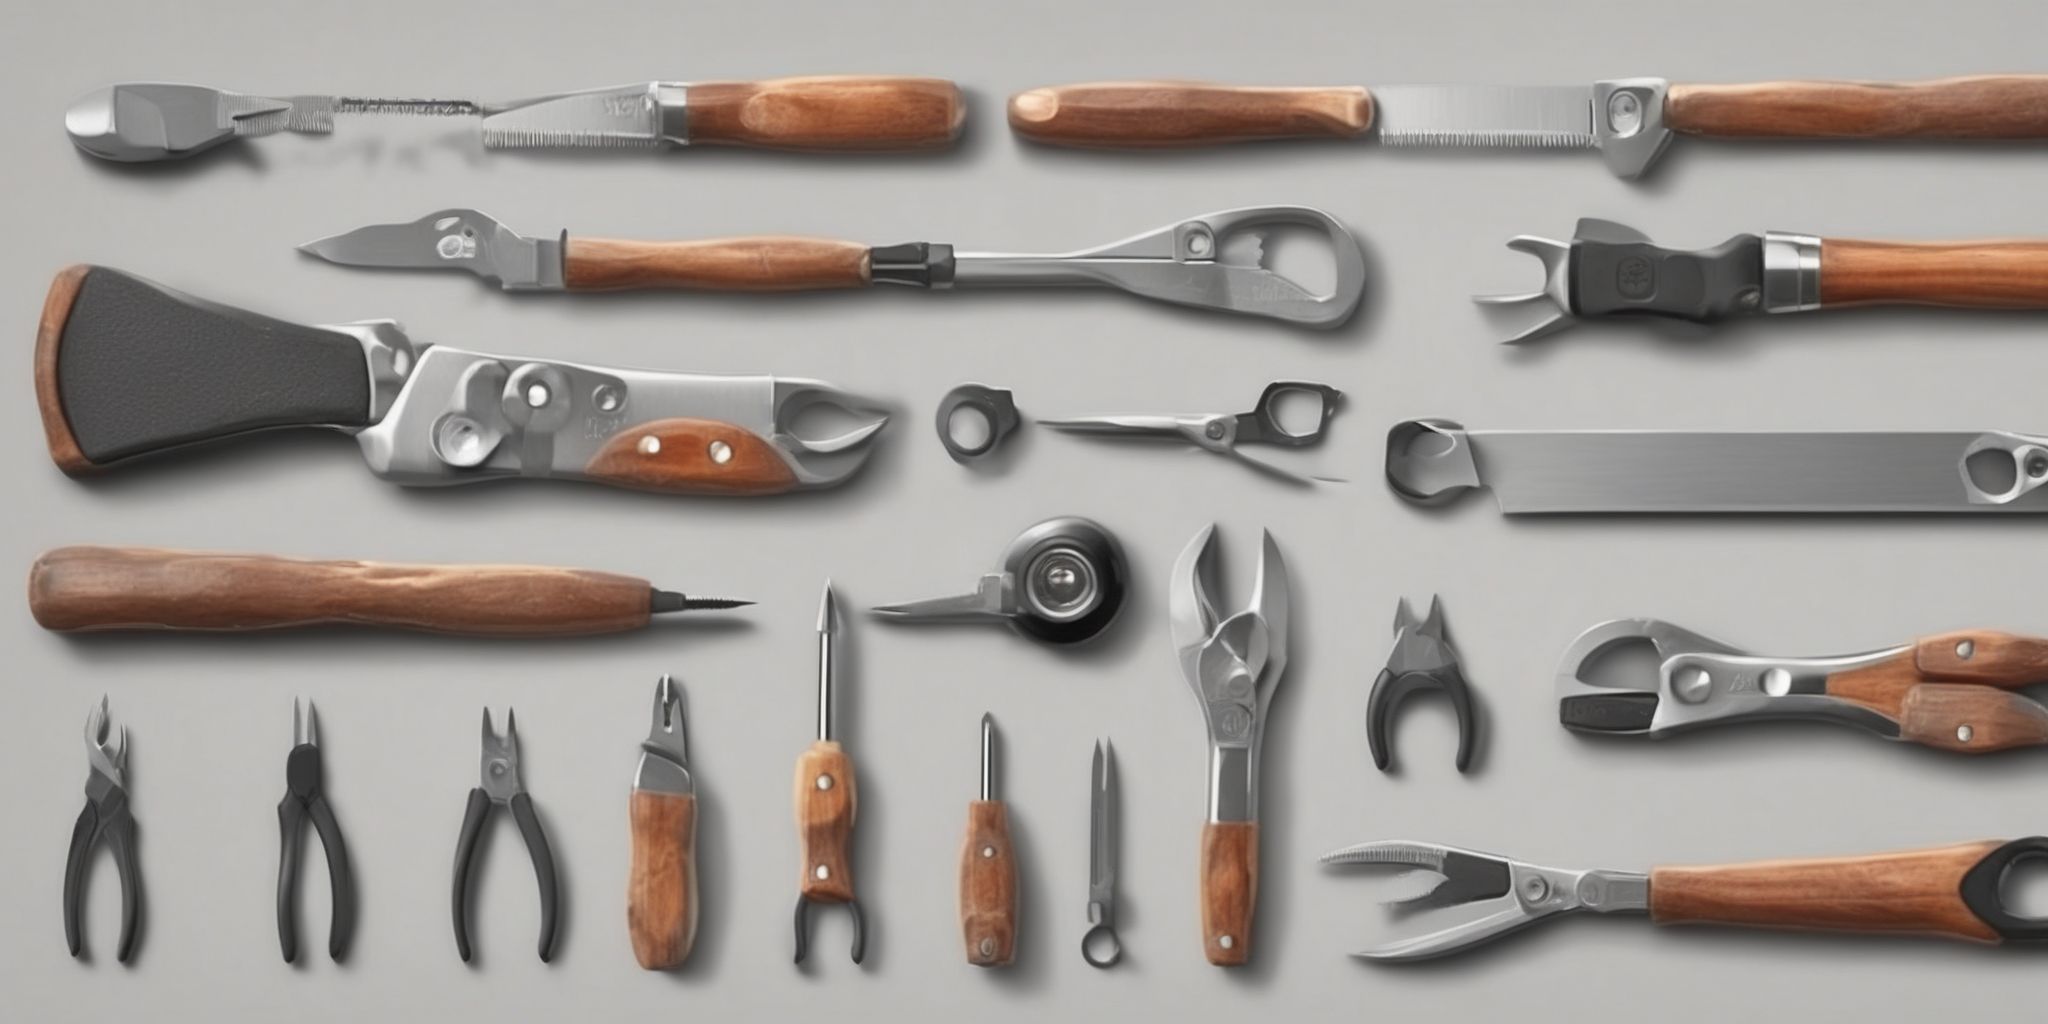 Toolkit  in realistic, photographic style